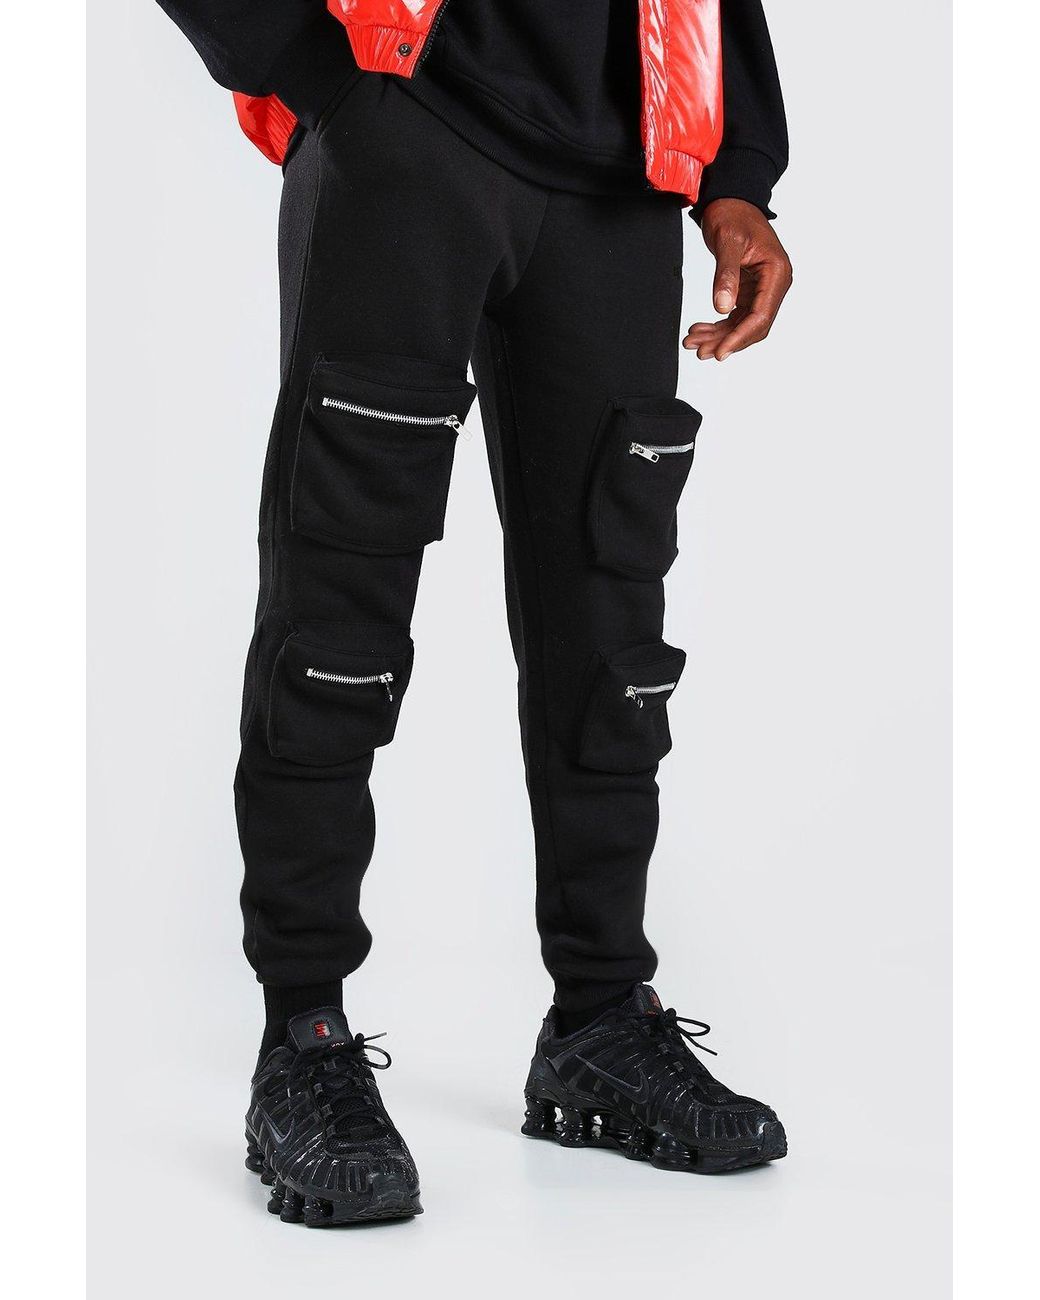 BoohooMAN Skinny Fit Cargo Jogger in Black for Men - Lyst